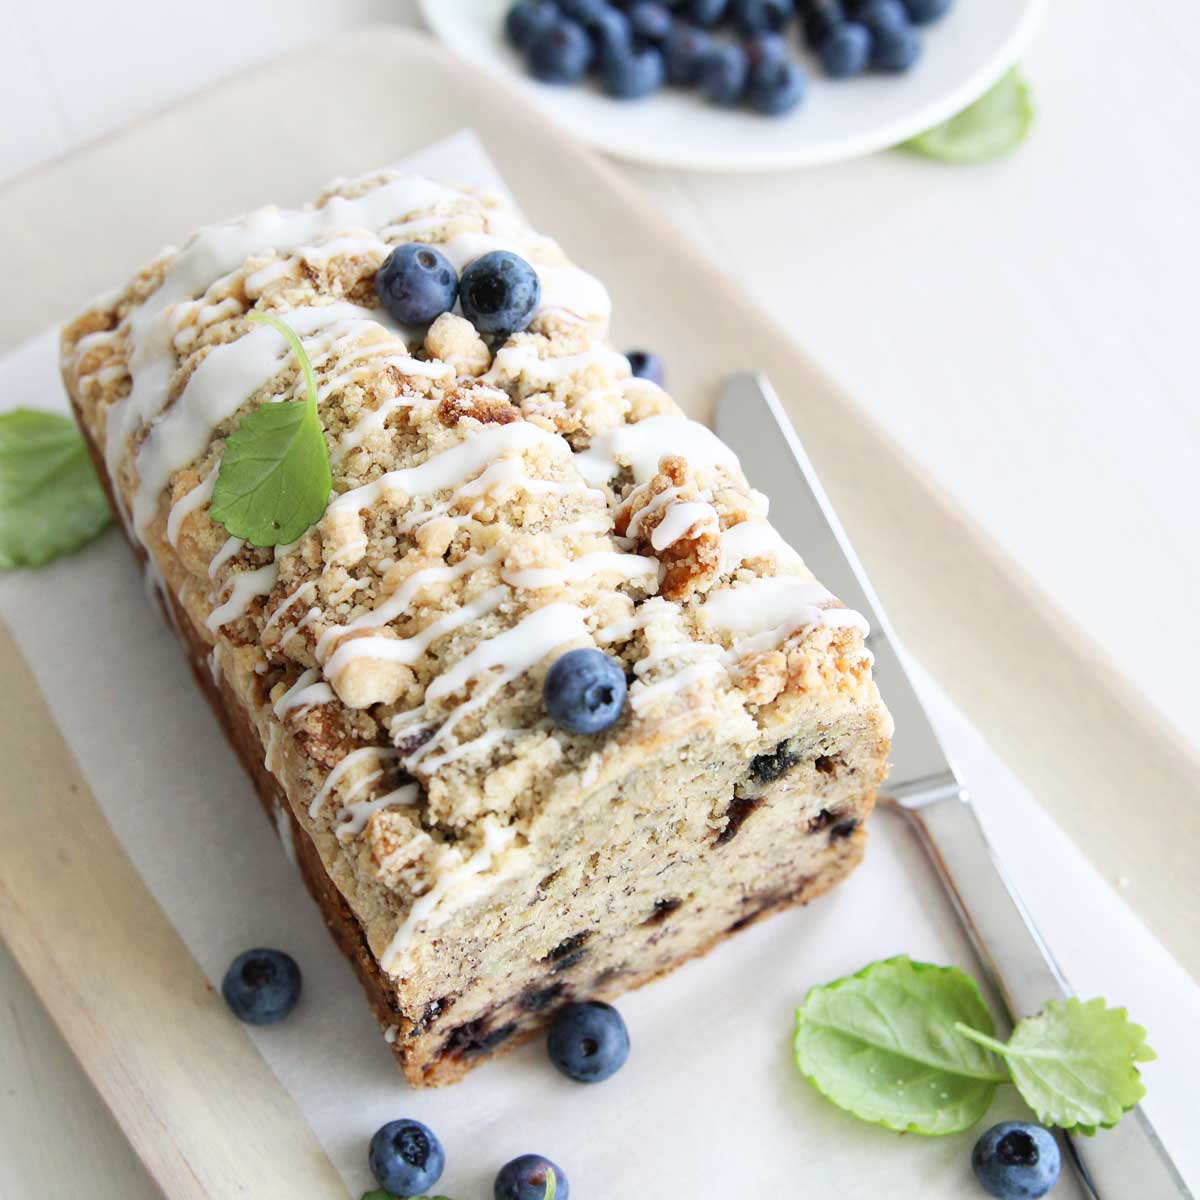 Blueberry Banana Bread with Oats & Streusel (Eggless, Dairy Free) - Pumpkin Bread With Banana